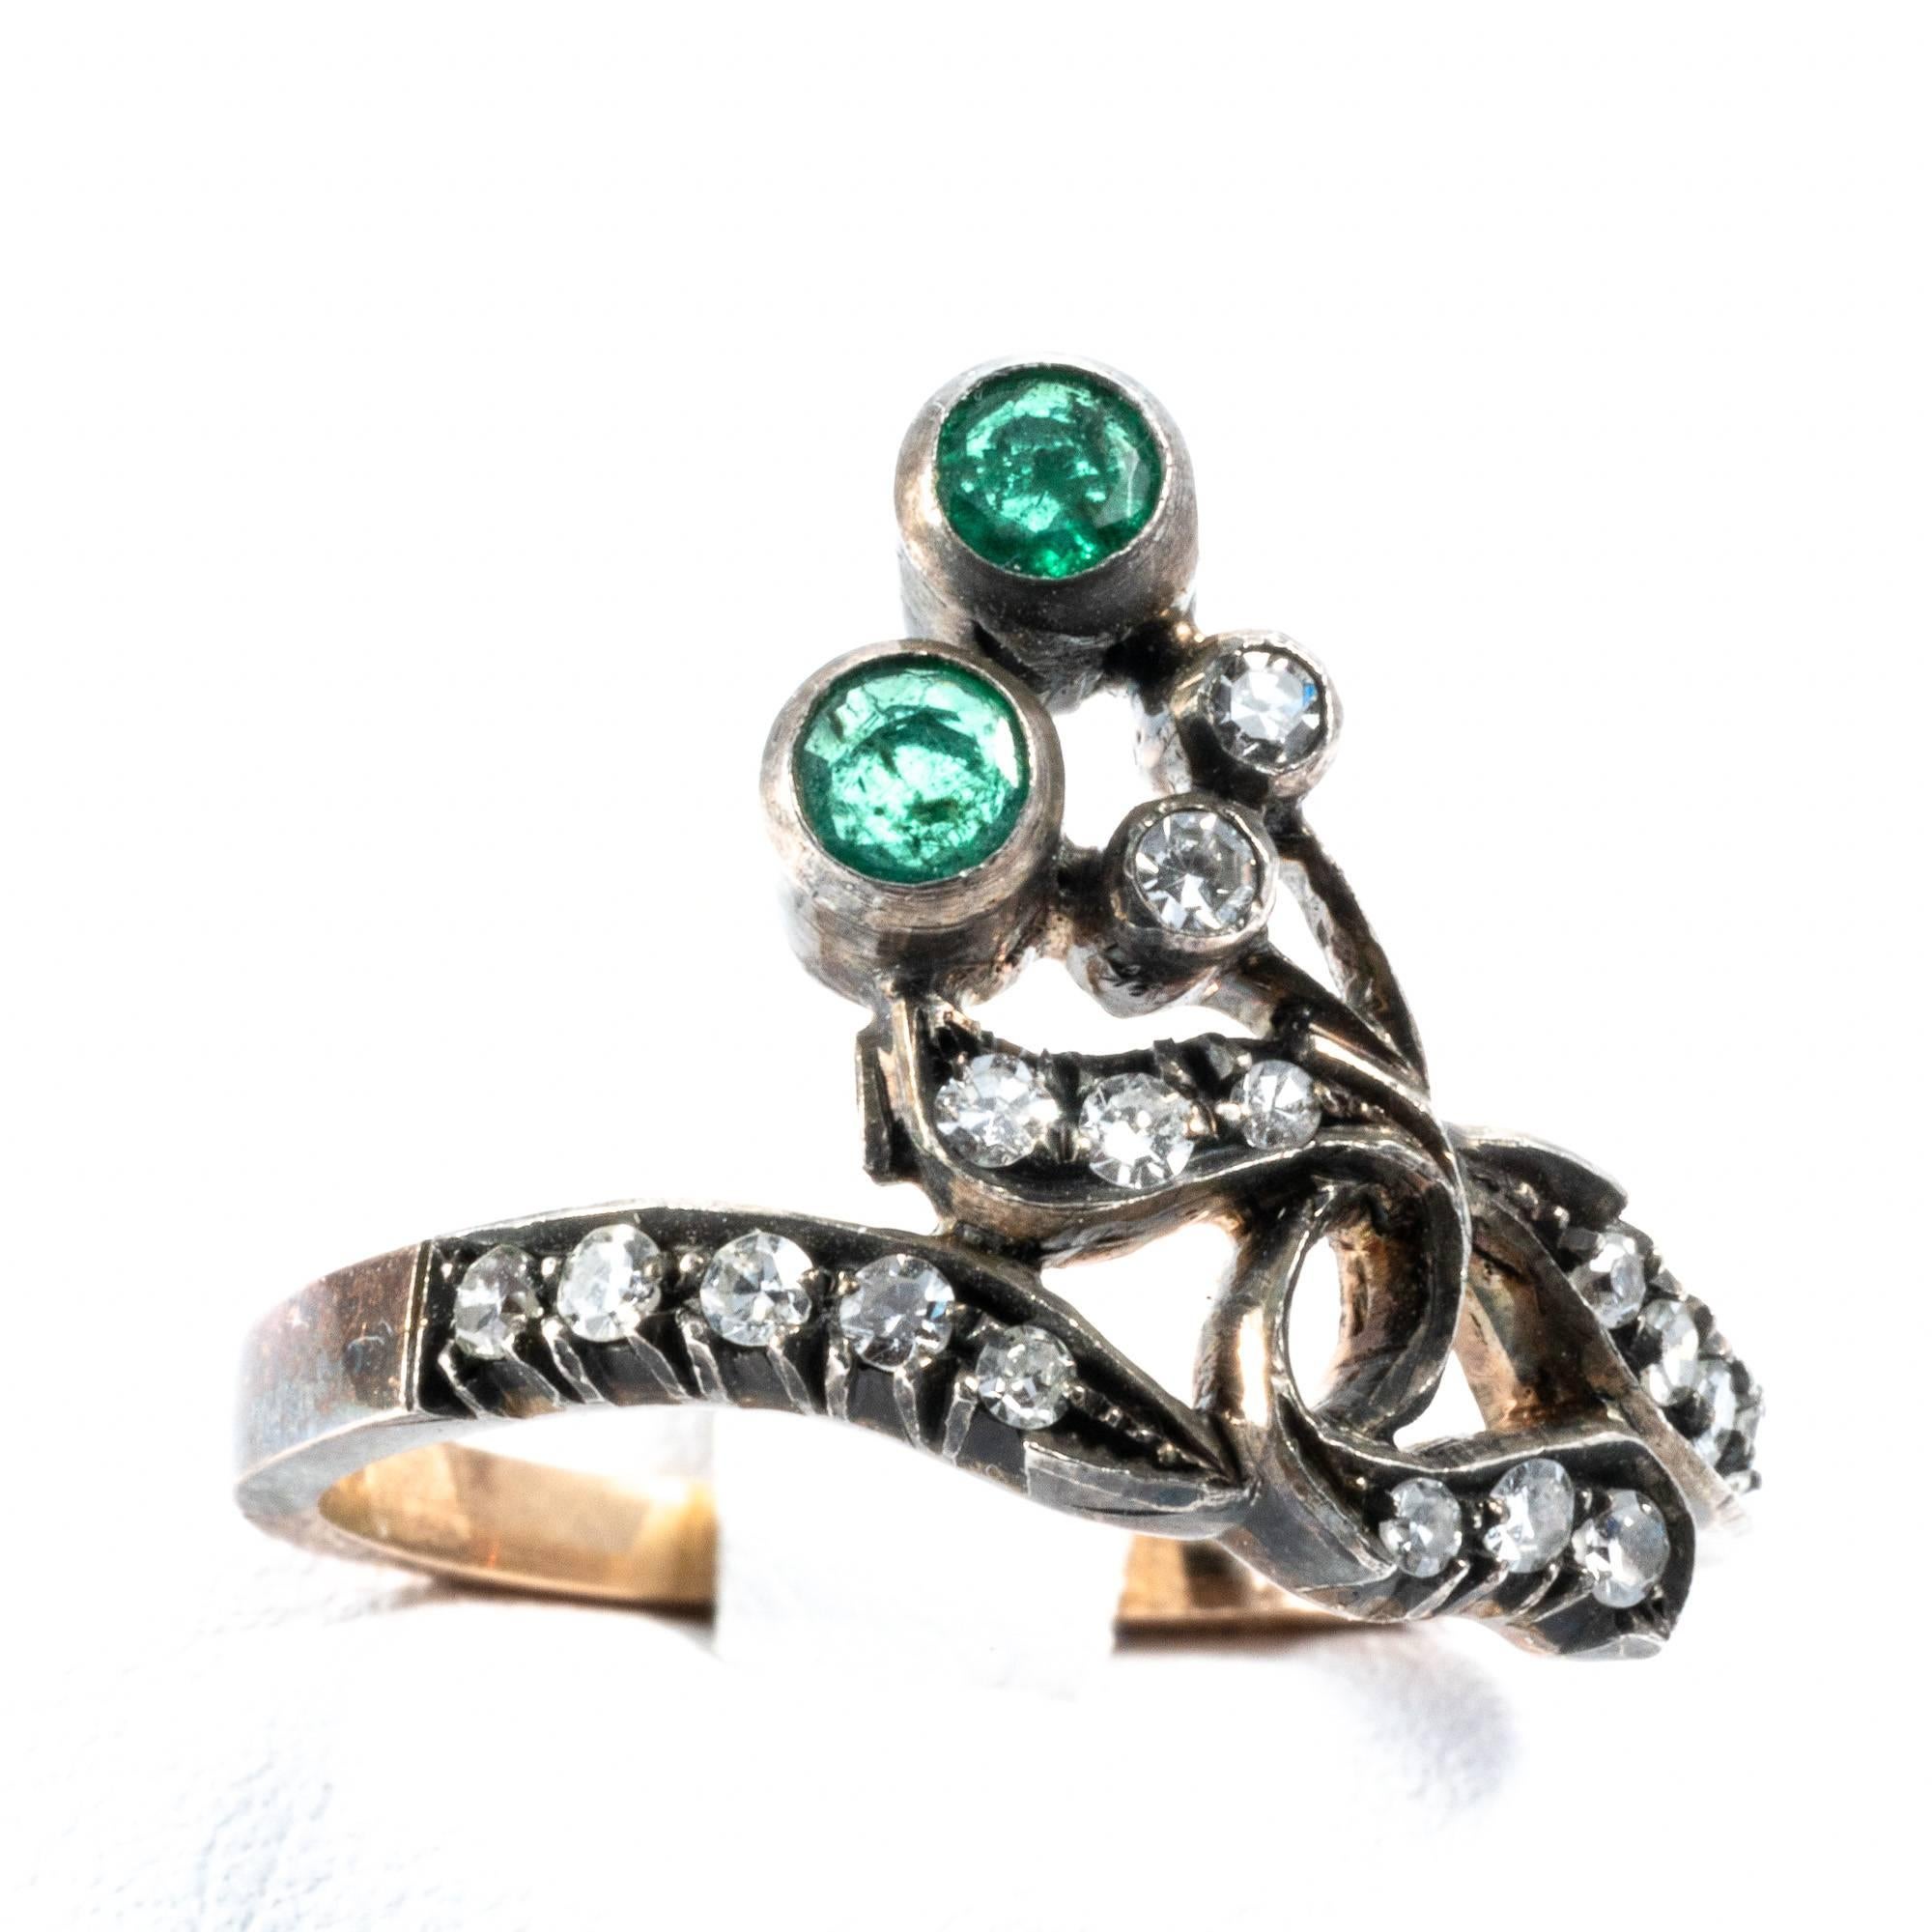 Original vintage ring band manufactured in the 1920's, it shows the typical symbol of the love tie, featuring a ribbon-like knot.  Sleek and elegant, this ring has 2 round cut emeralds and 18 diamonds that enlighten it's delicate swirls.
Actual ring